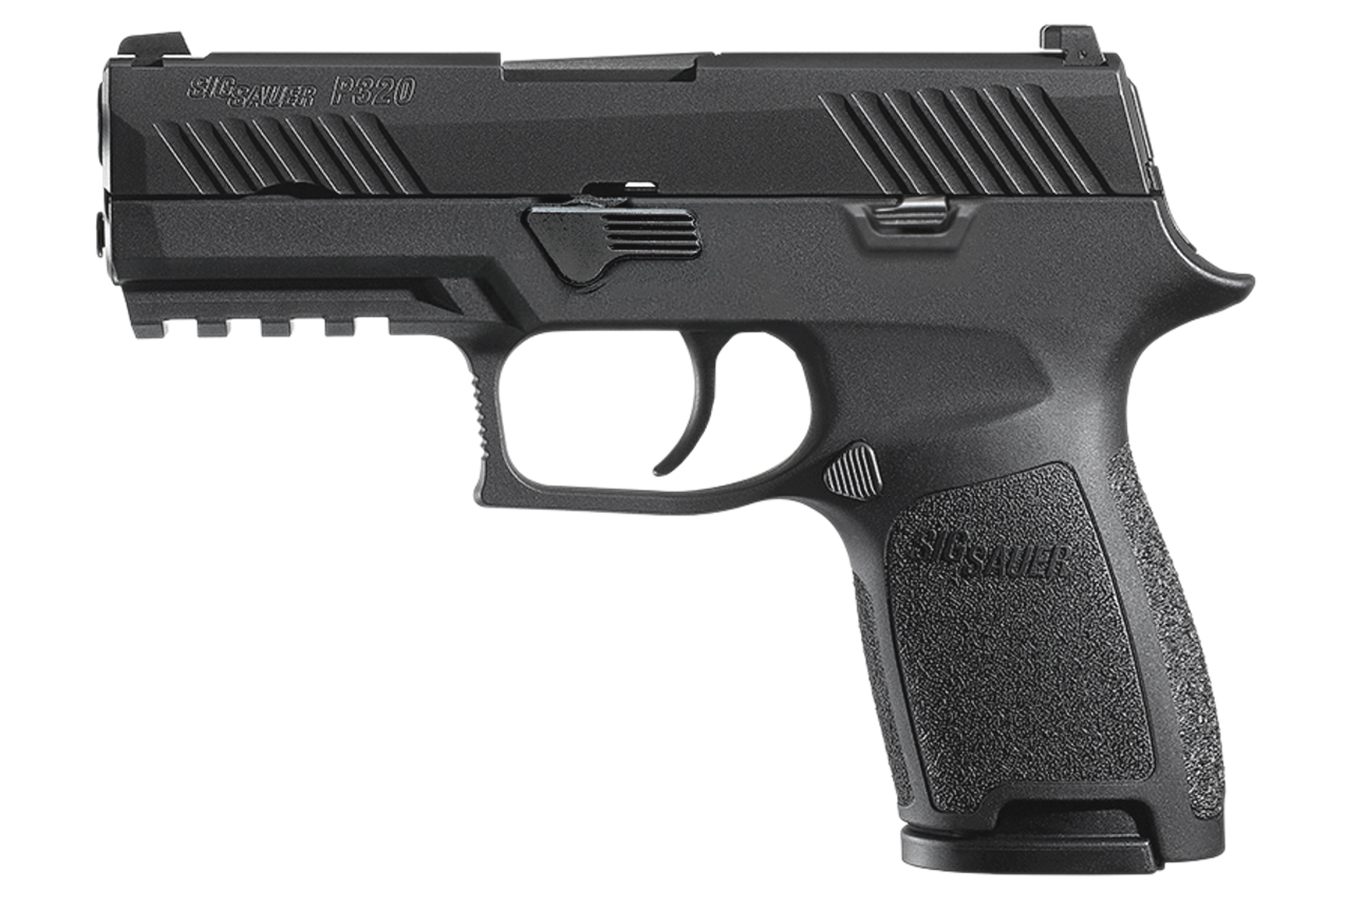 P320 COMPACT 45 ACP WITH NIGHT SIGHTS